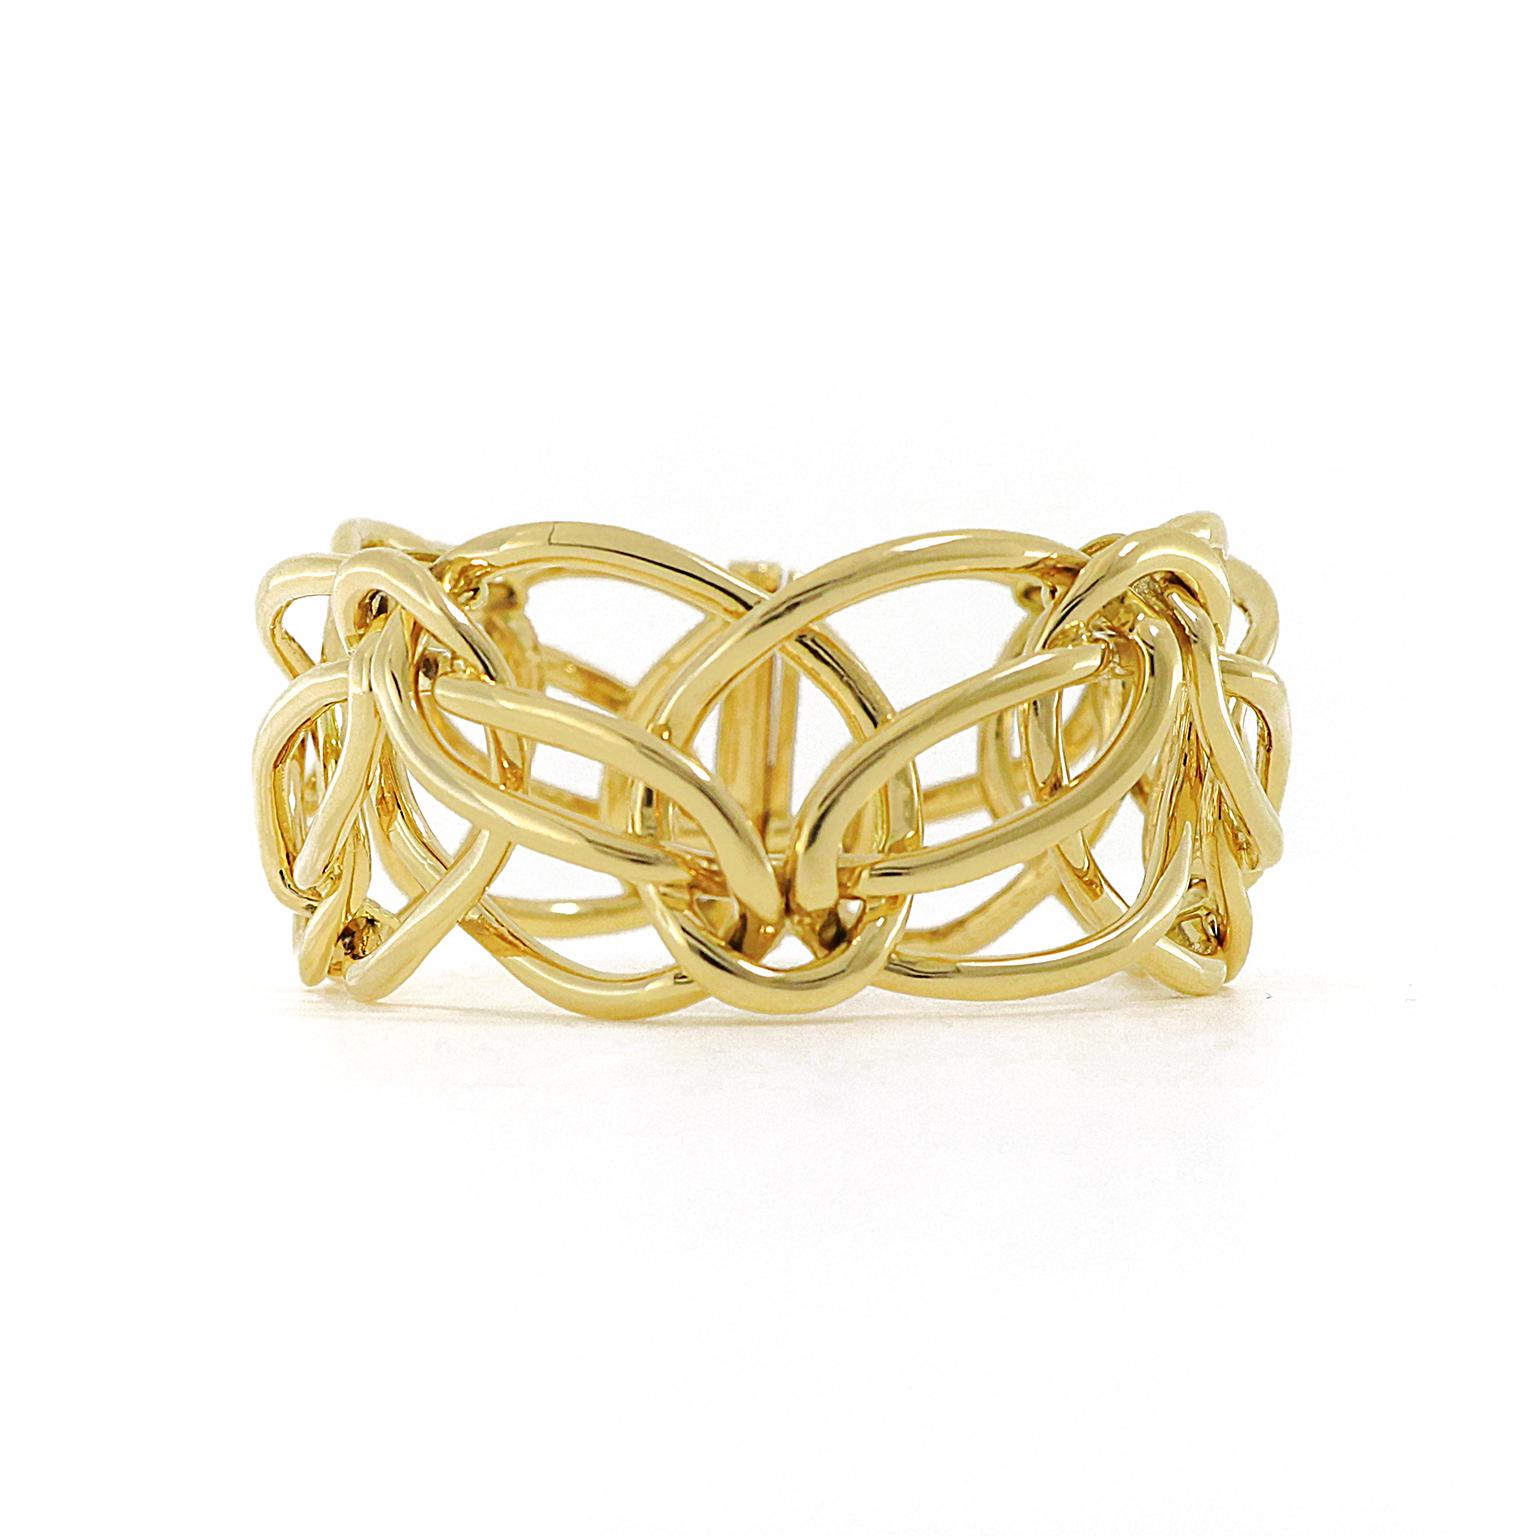 Radiant 18k yellow gold wreathes in an intricate design reminiscent of ribbons. The polished metal reflects light in every direction as the wrist turns. A bar clasp closes the bracelet, which measures 1.19 inches (width) by 0.28 inches (depth) by